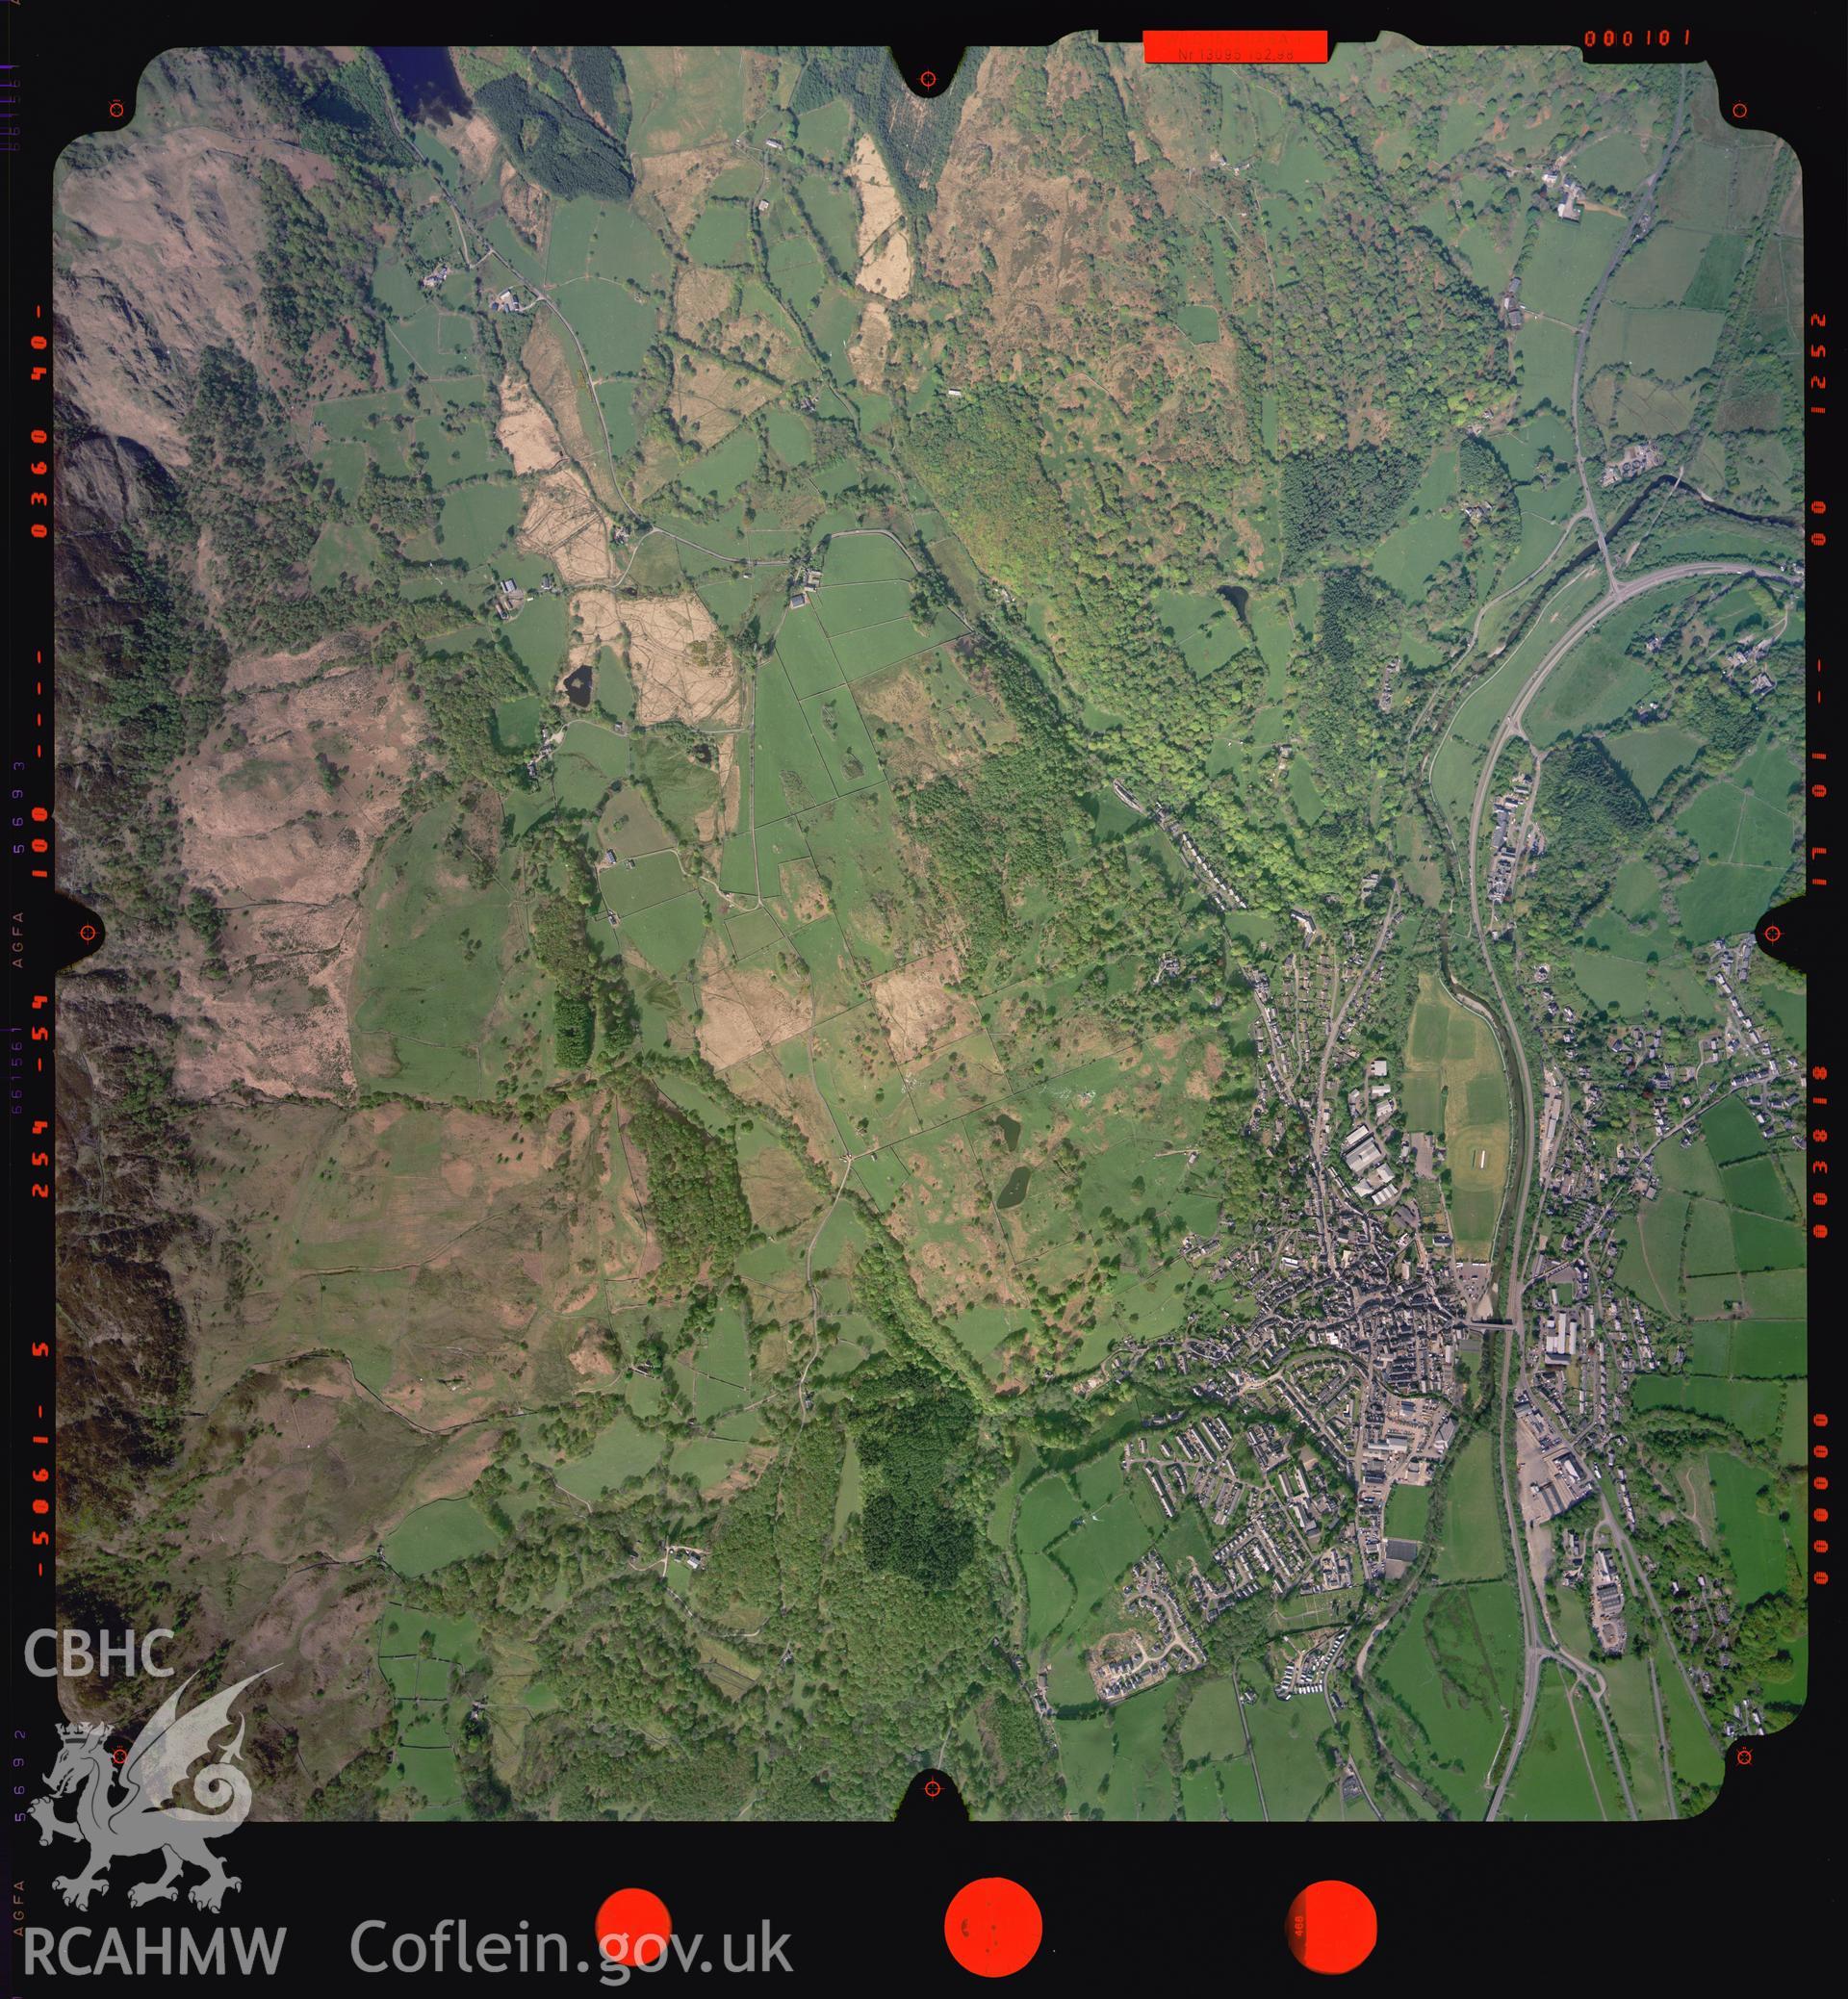 Digitized copy of a colour aerial photograph showing an area to the west of Dolgellau, taken by Ordnance Survey, 2005.